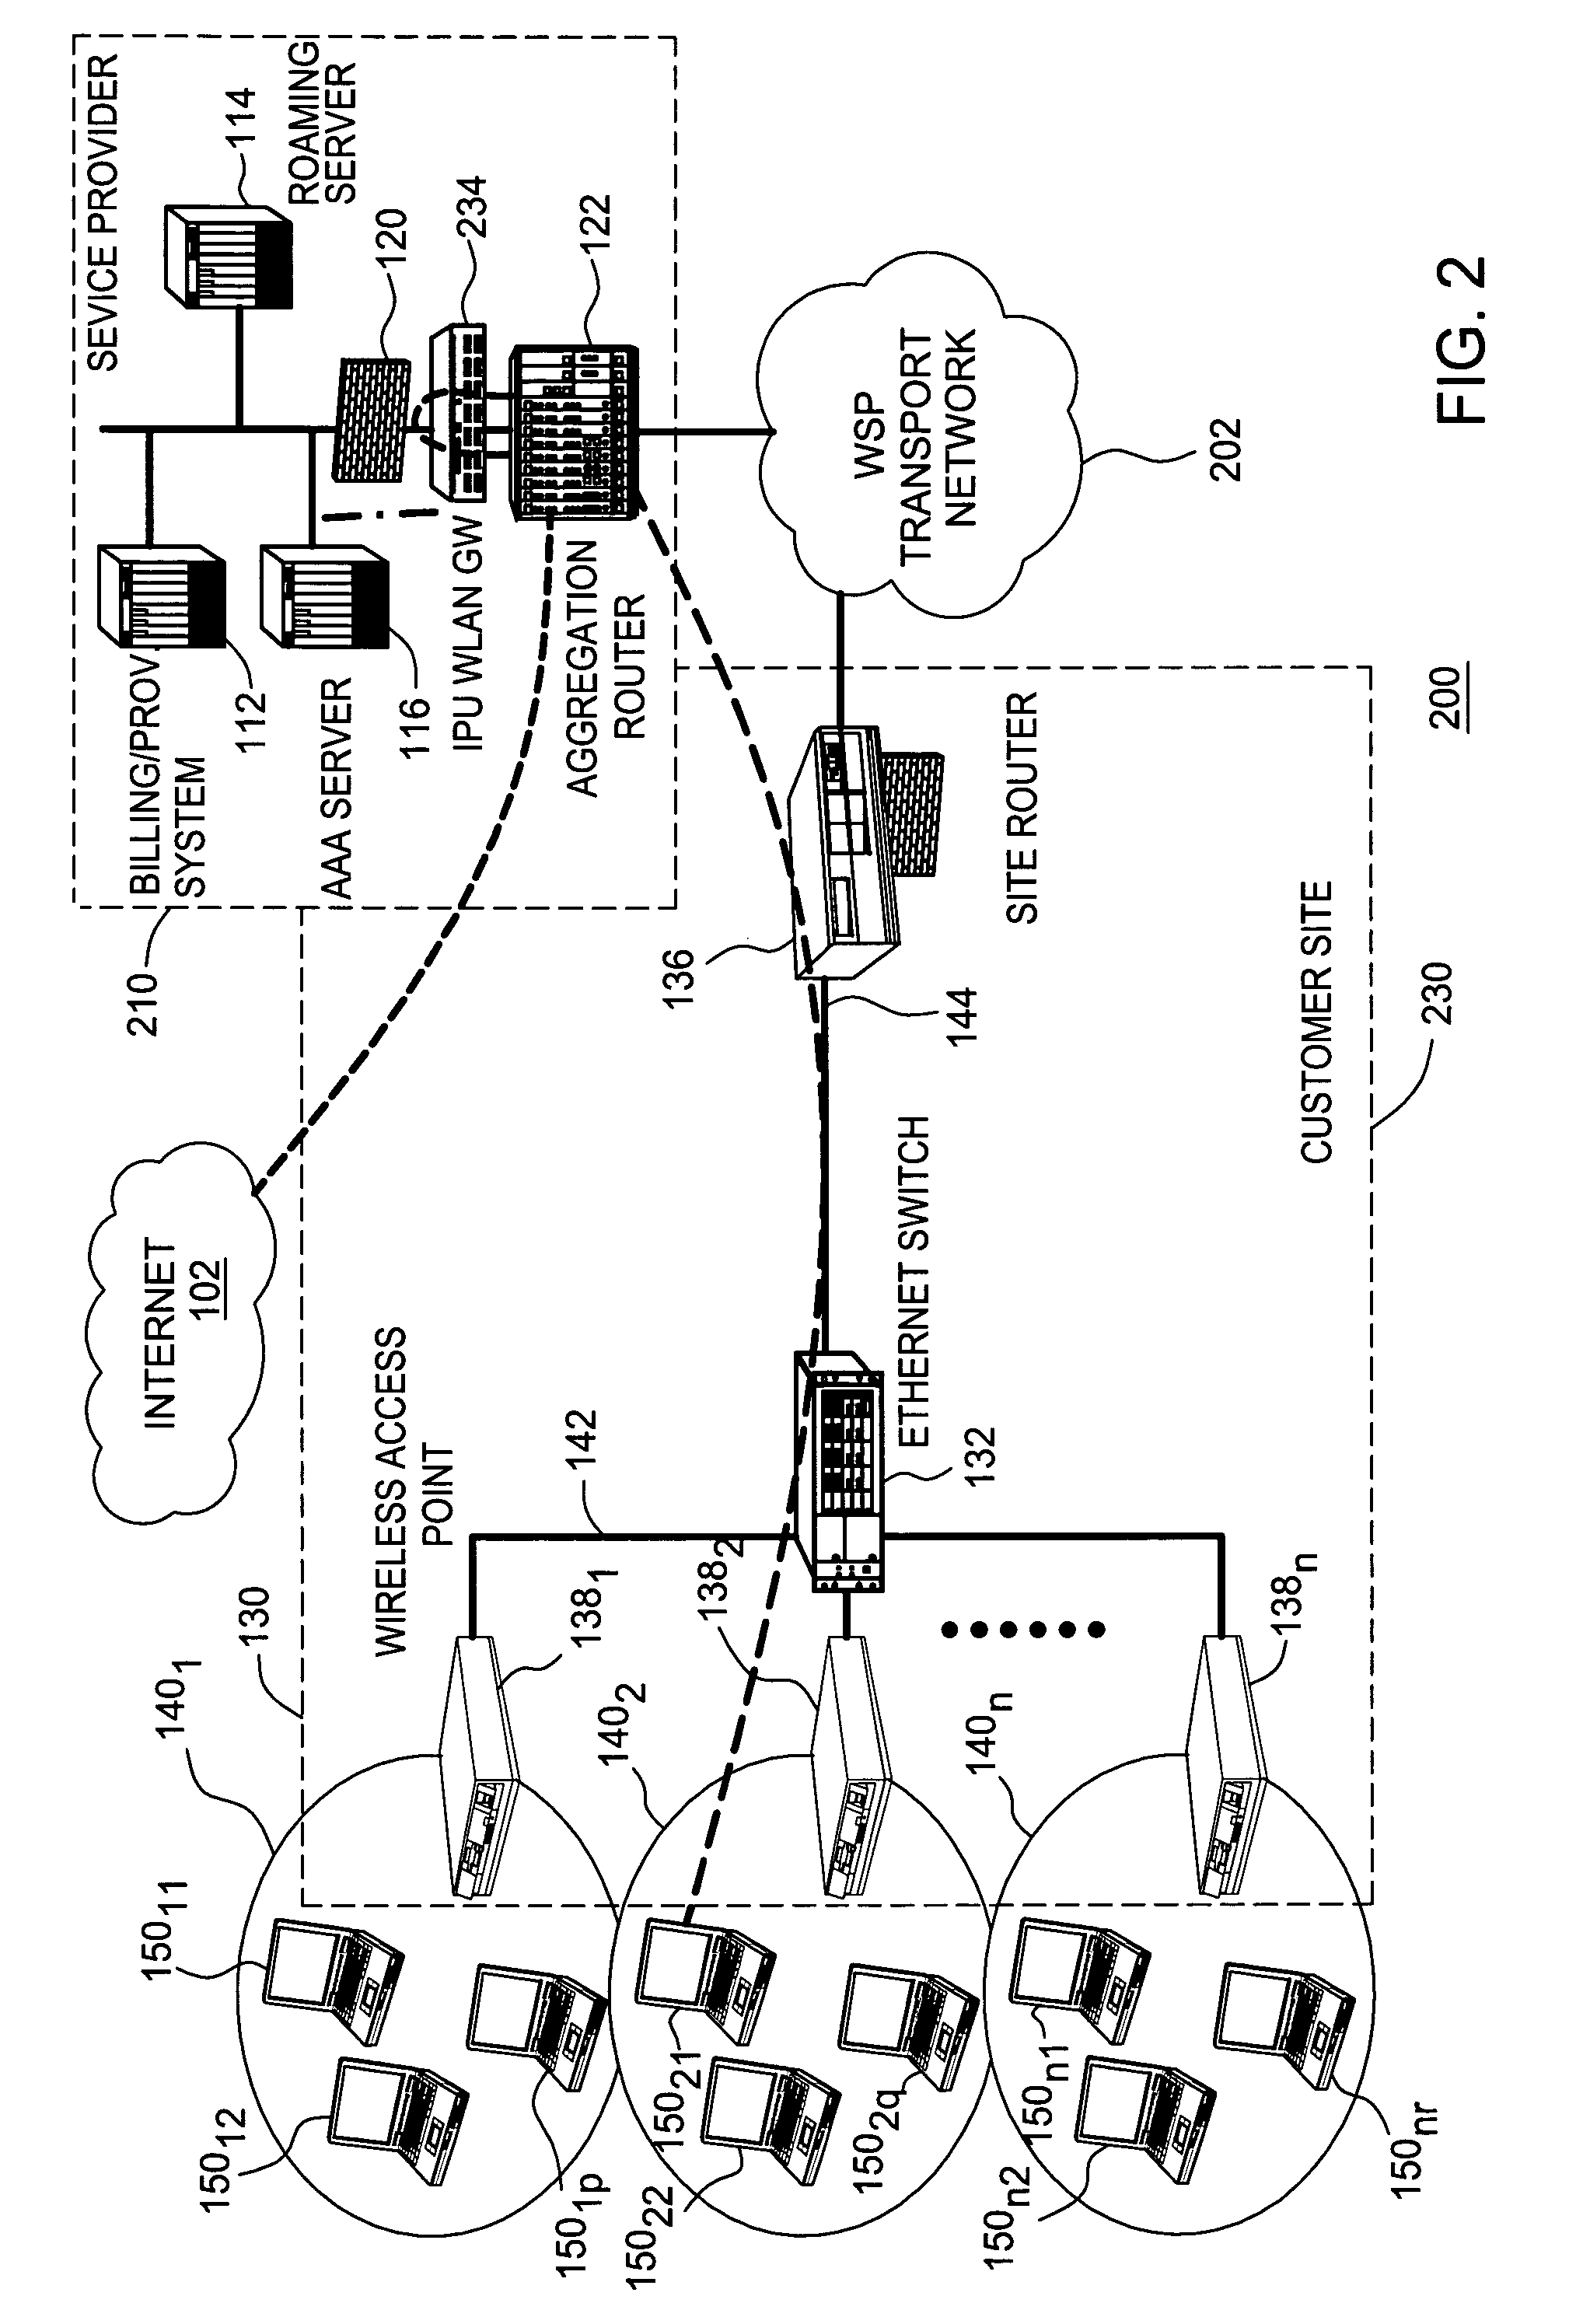 Communications protocol between a gateway and an access point